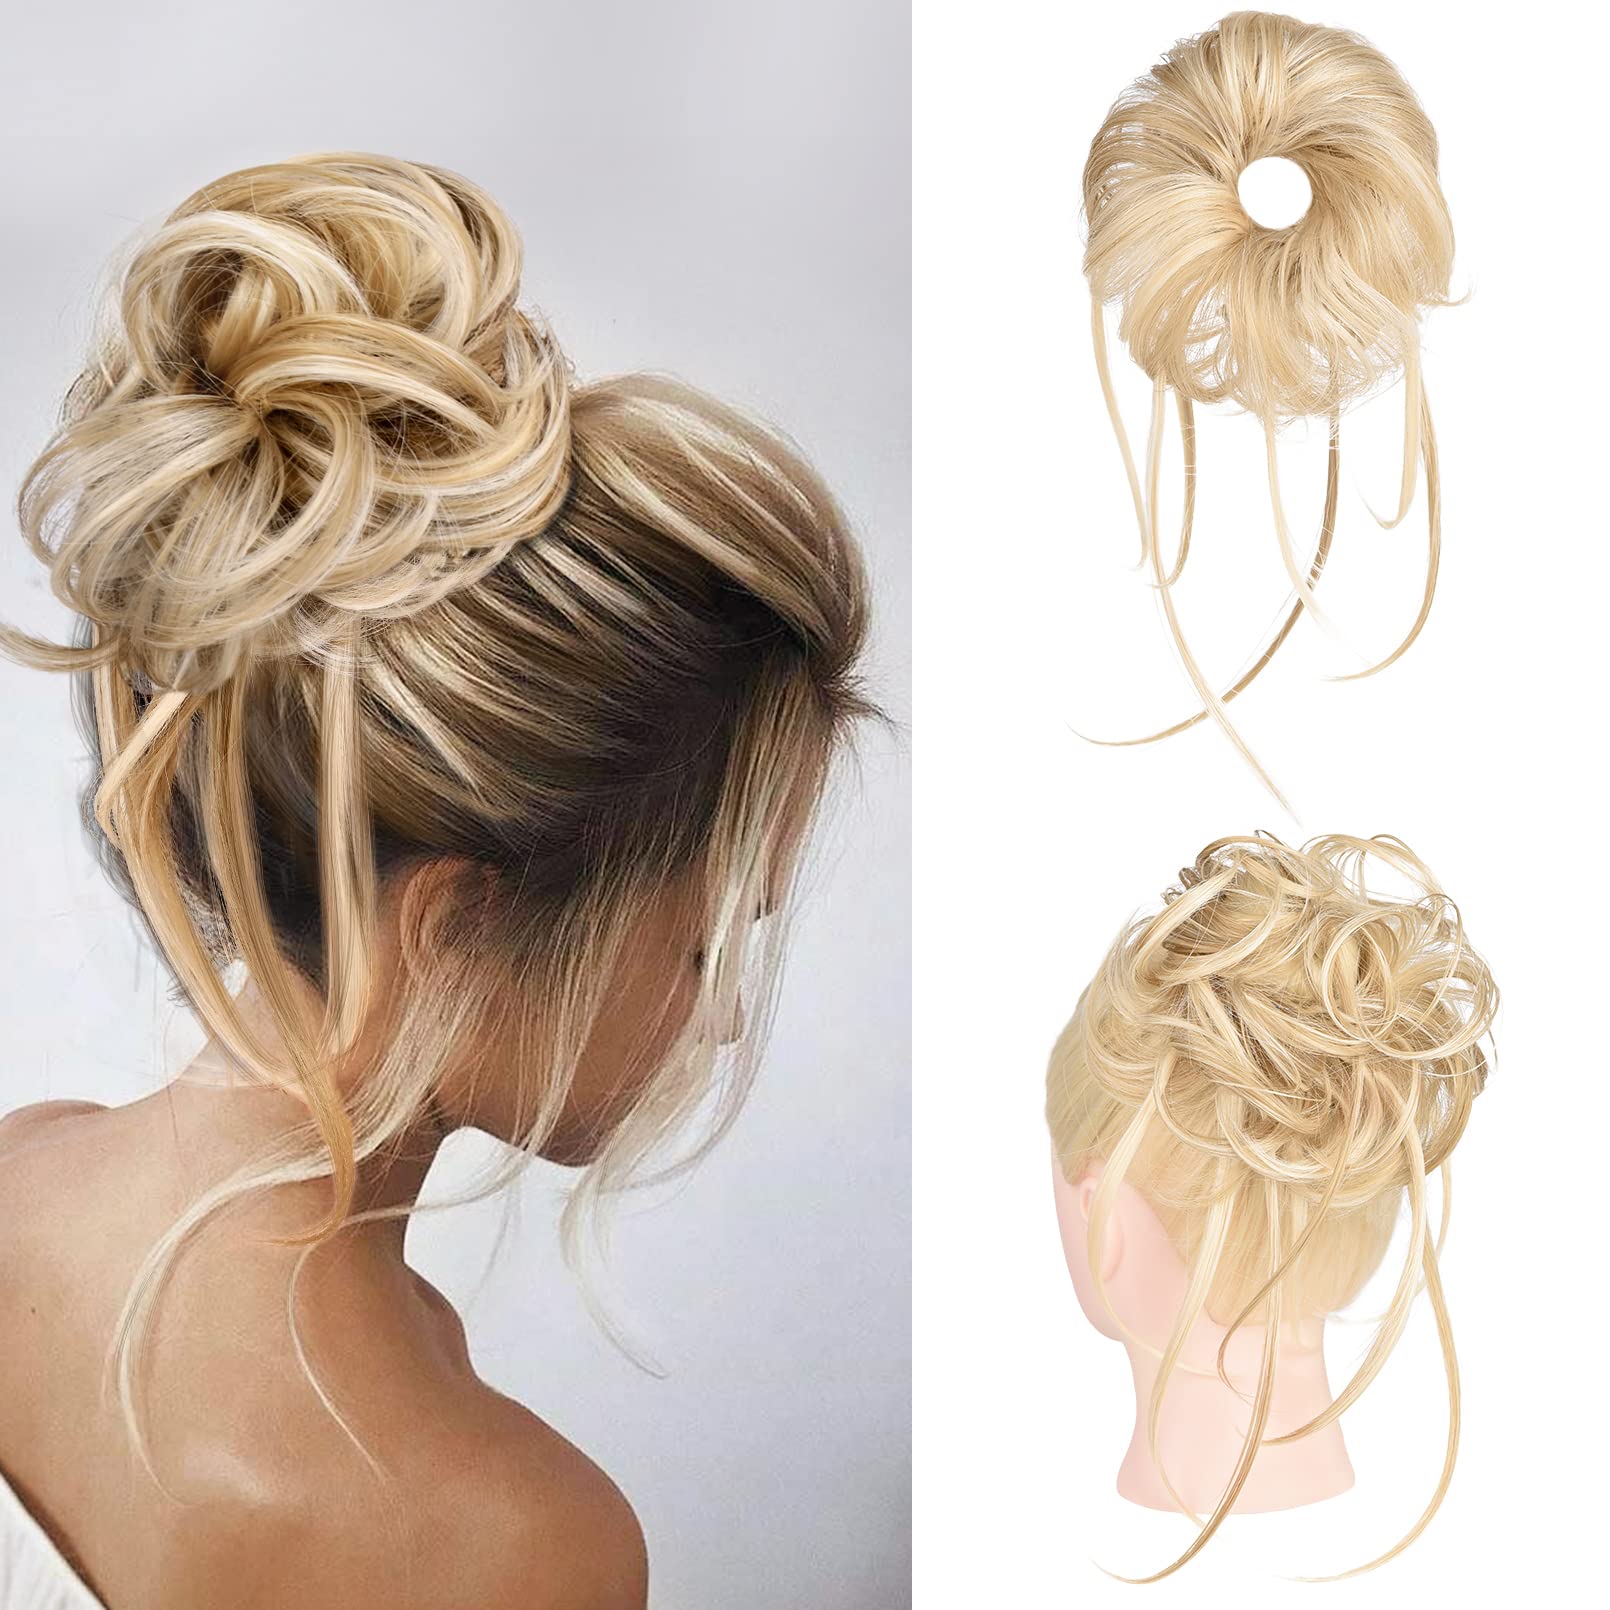 17,223 Cute Girl Hair Bun Royalty-Free Photos and Stock Images |  Shutterstock